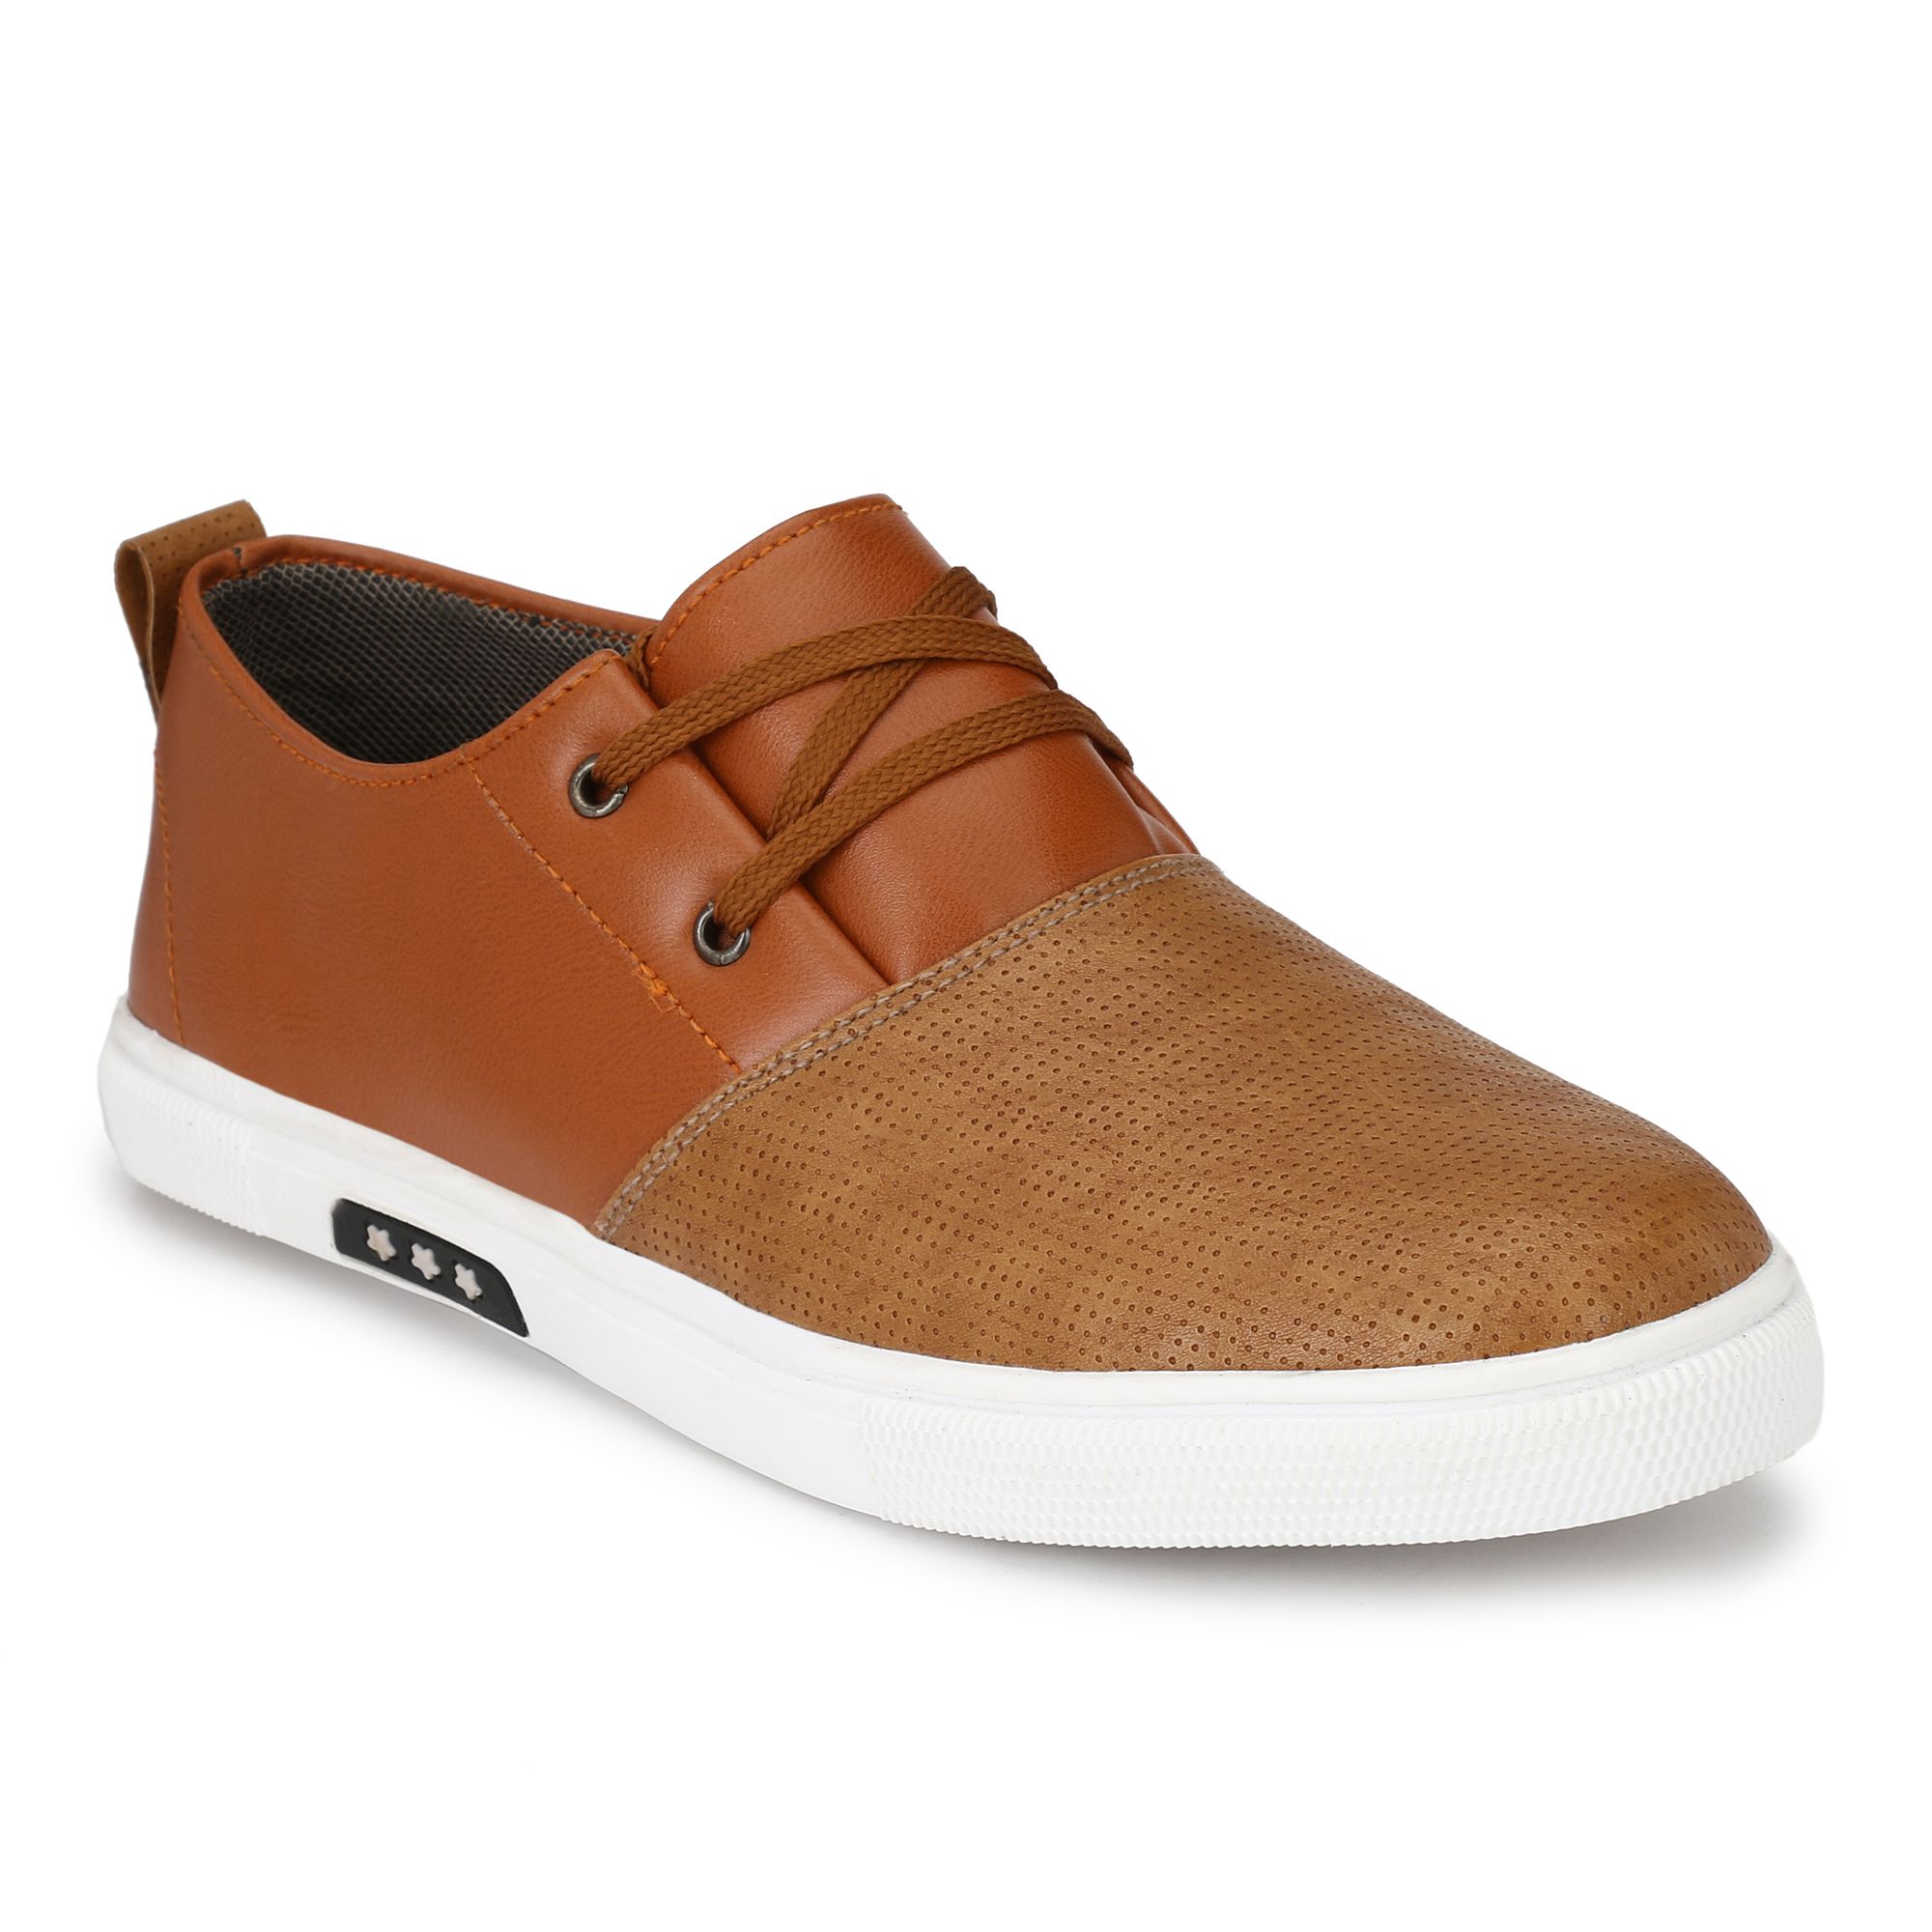 addoxy casual shoes